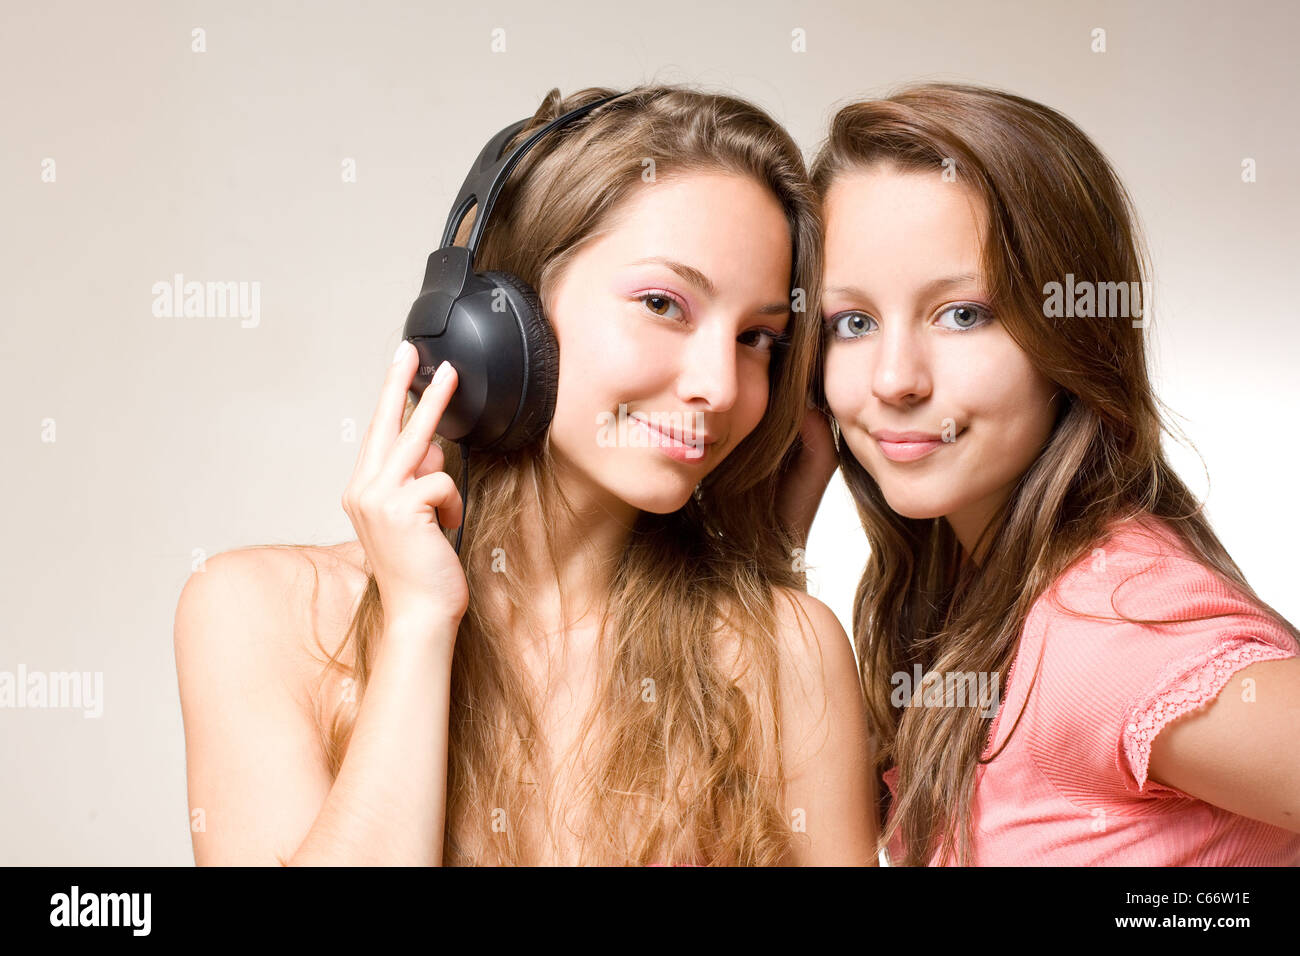 Two beautiful young brunettes sharin their music playing with their headphones. Stock Photo